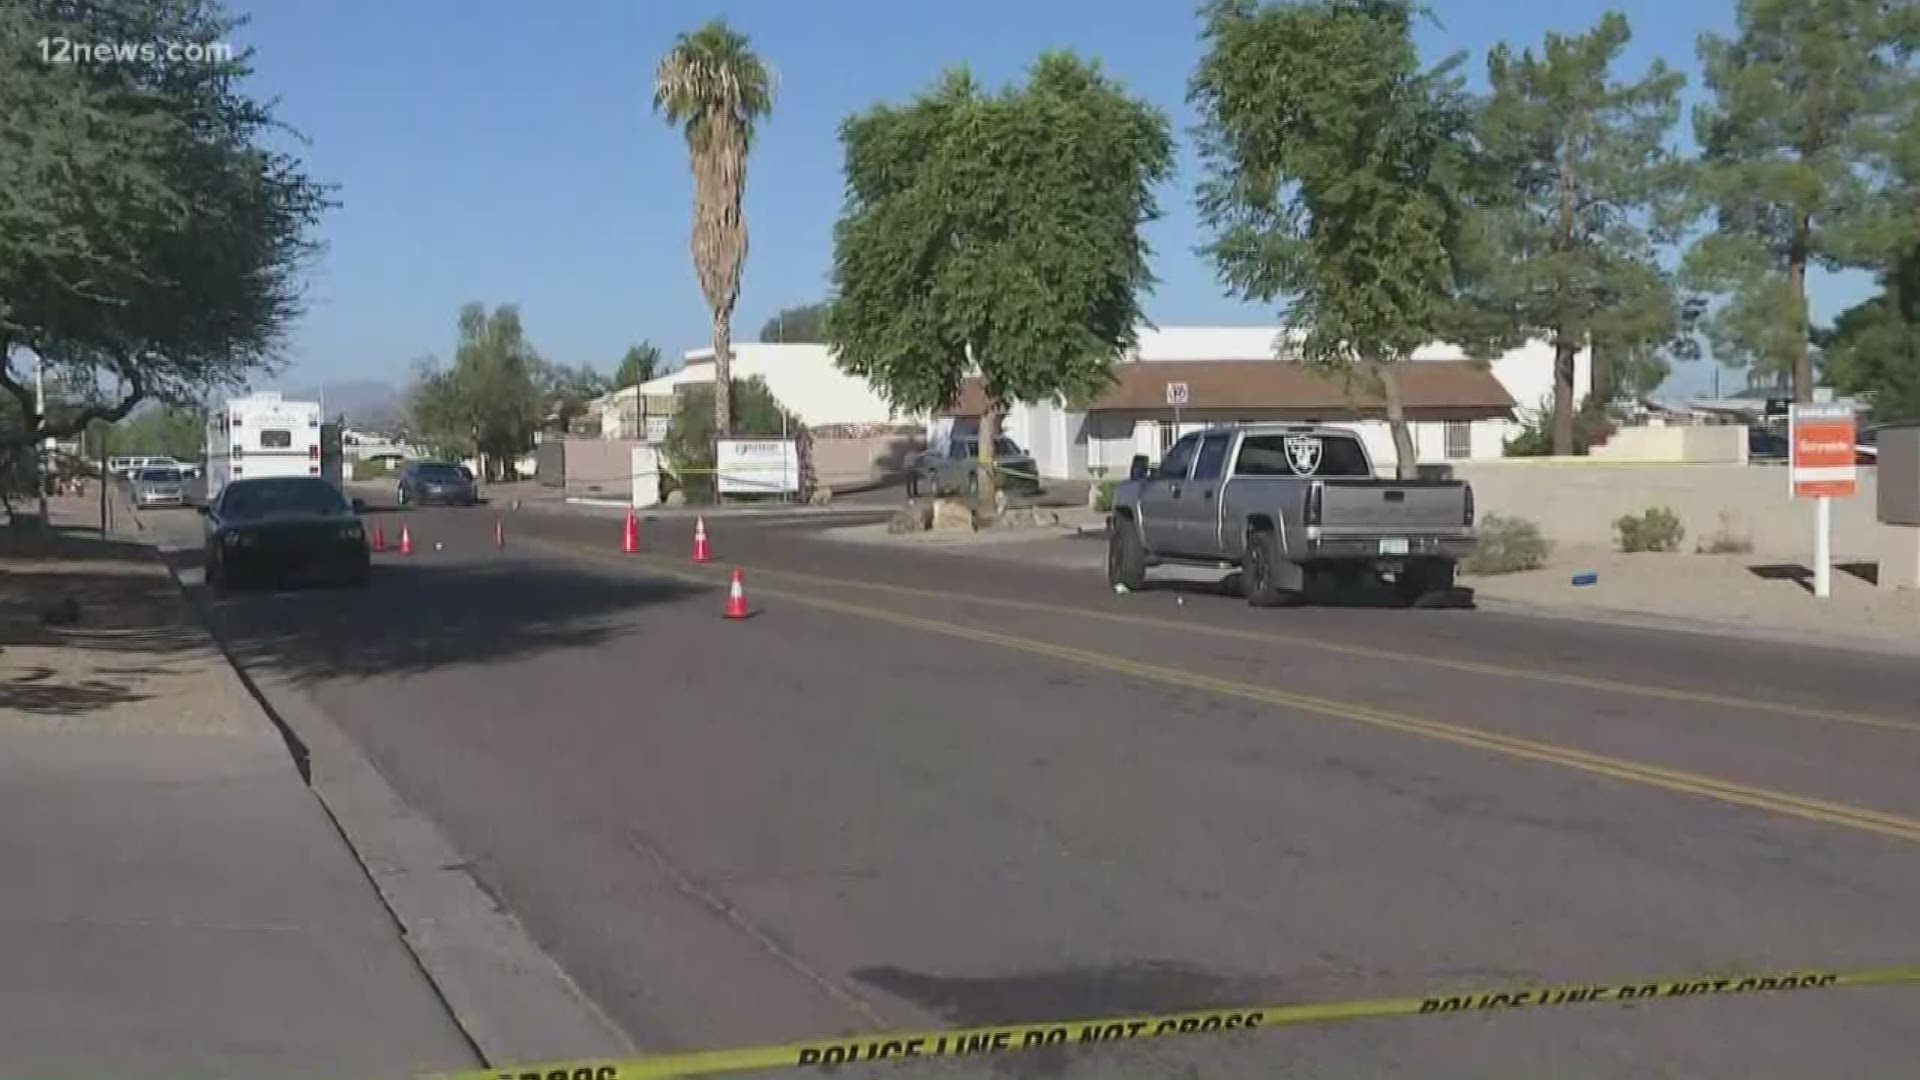 Police are still investigating what led to a shooting in Glendale near 67th and Northern avenues.